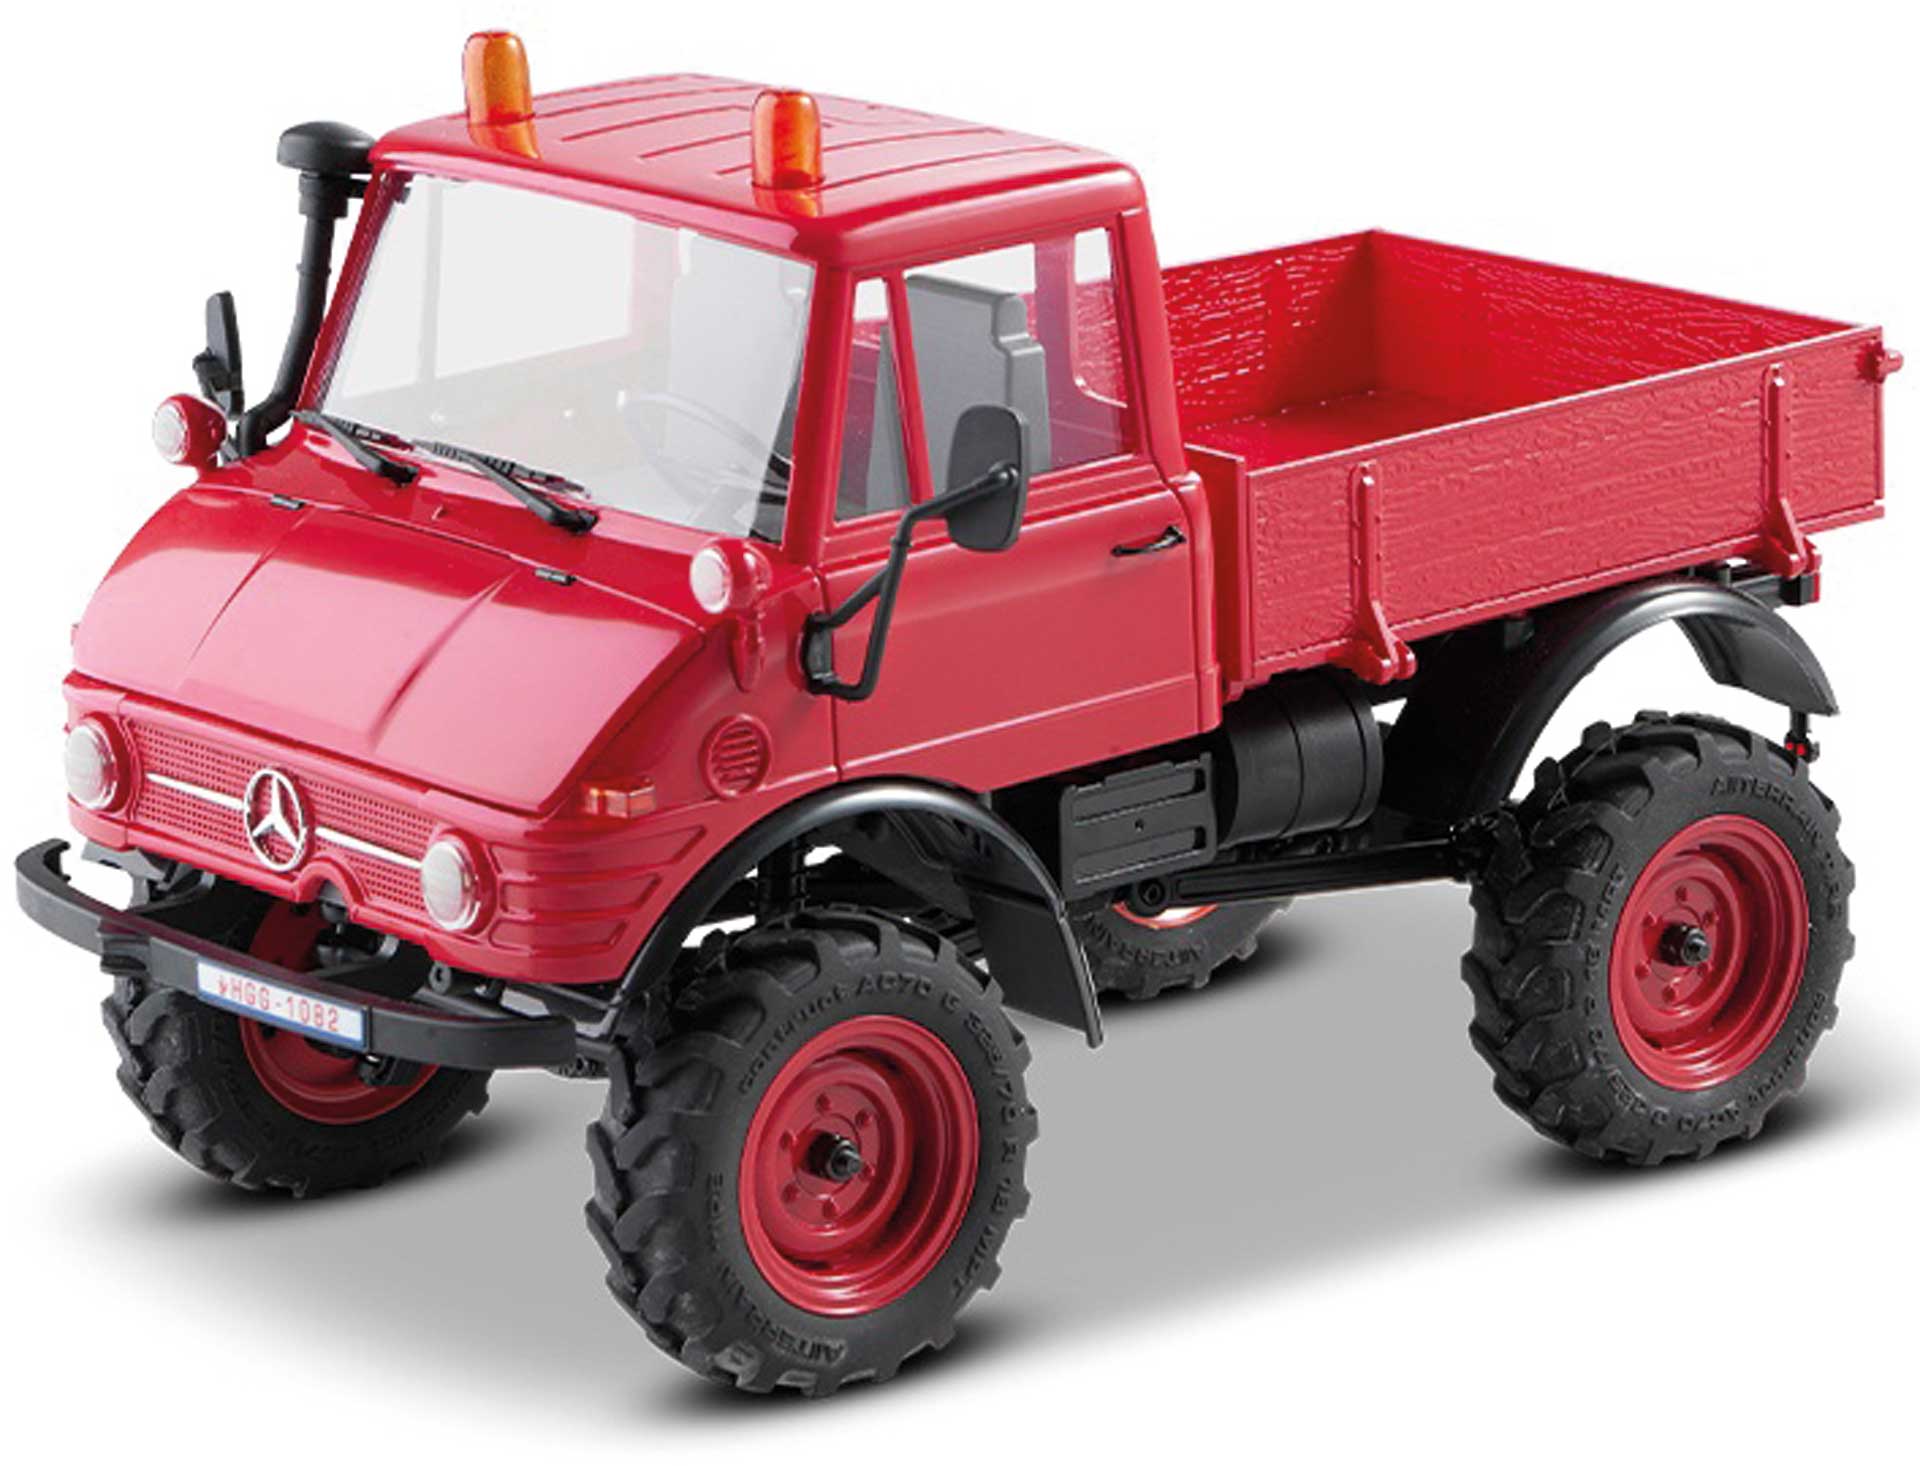 FMS FXC24 Unimog 421 1:24 red - RTR 2.4GHz